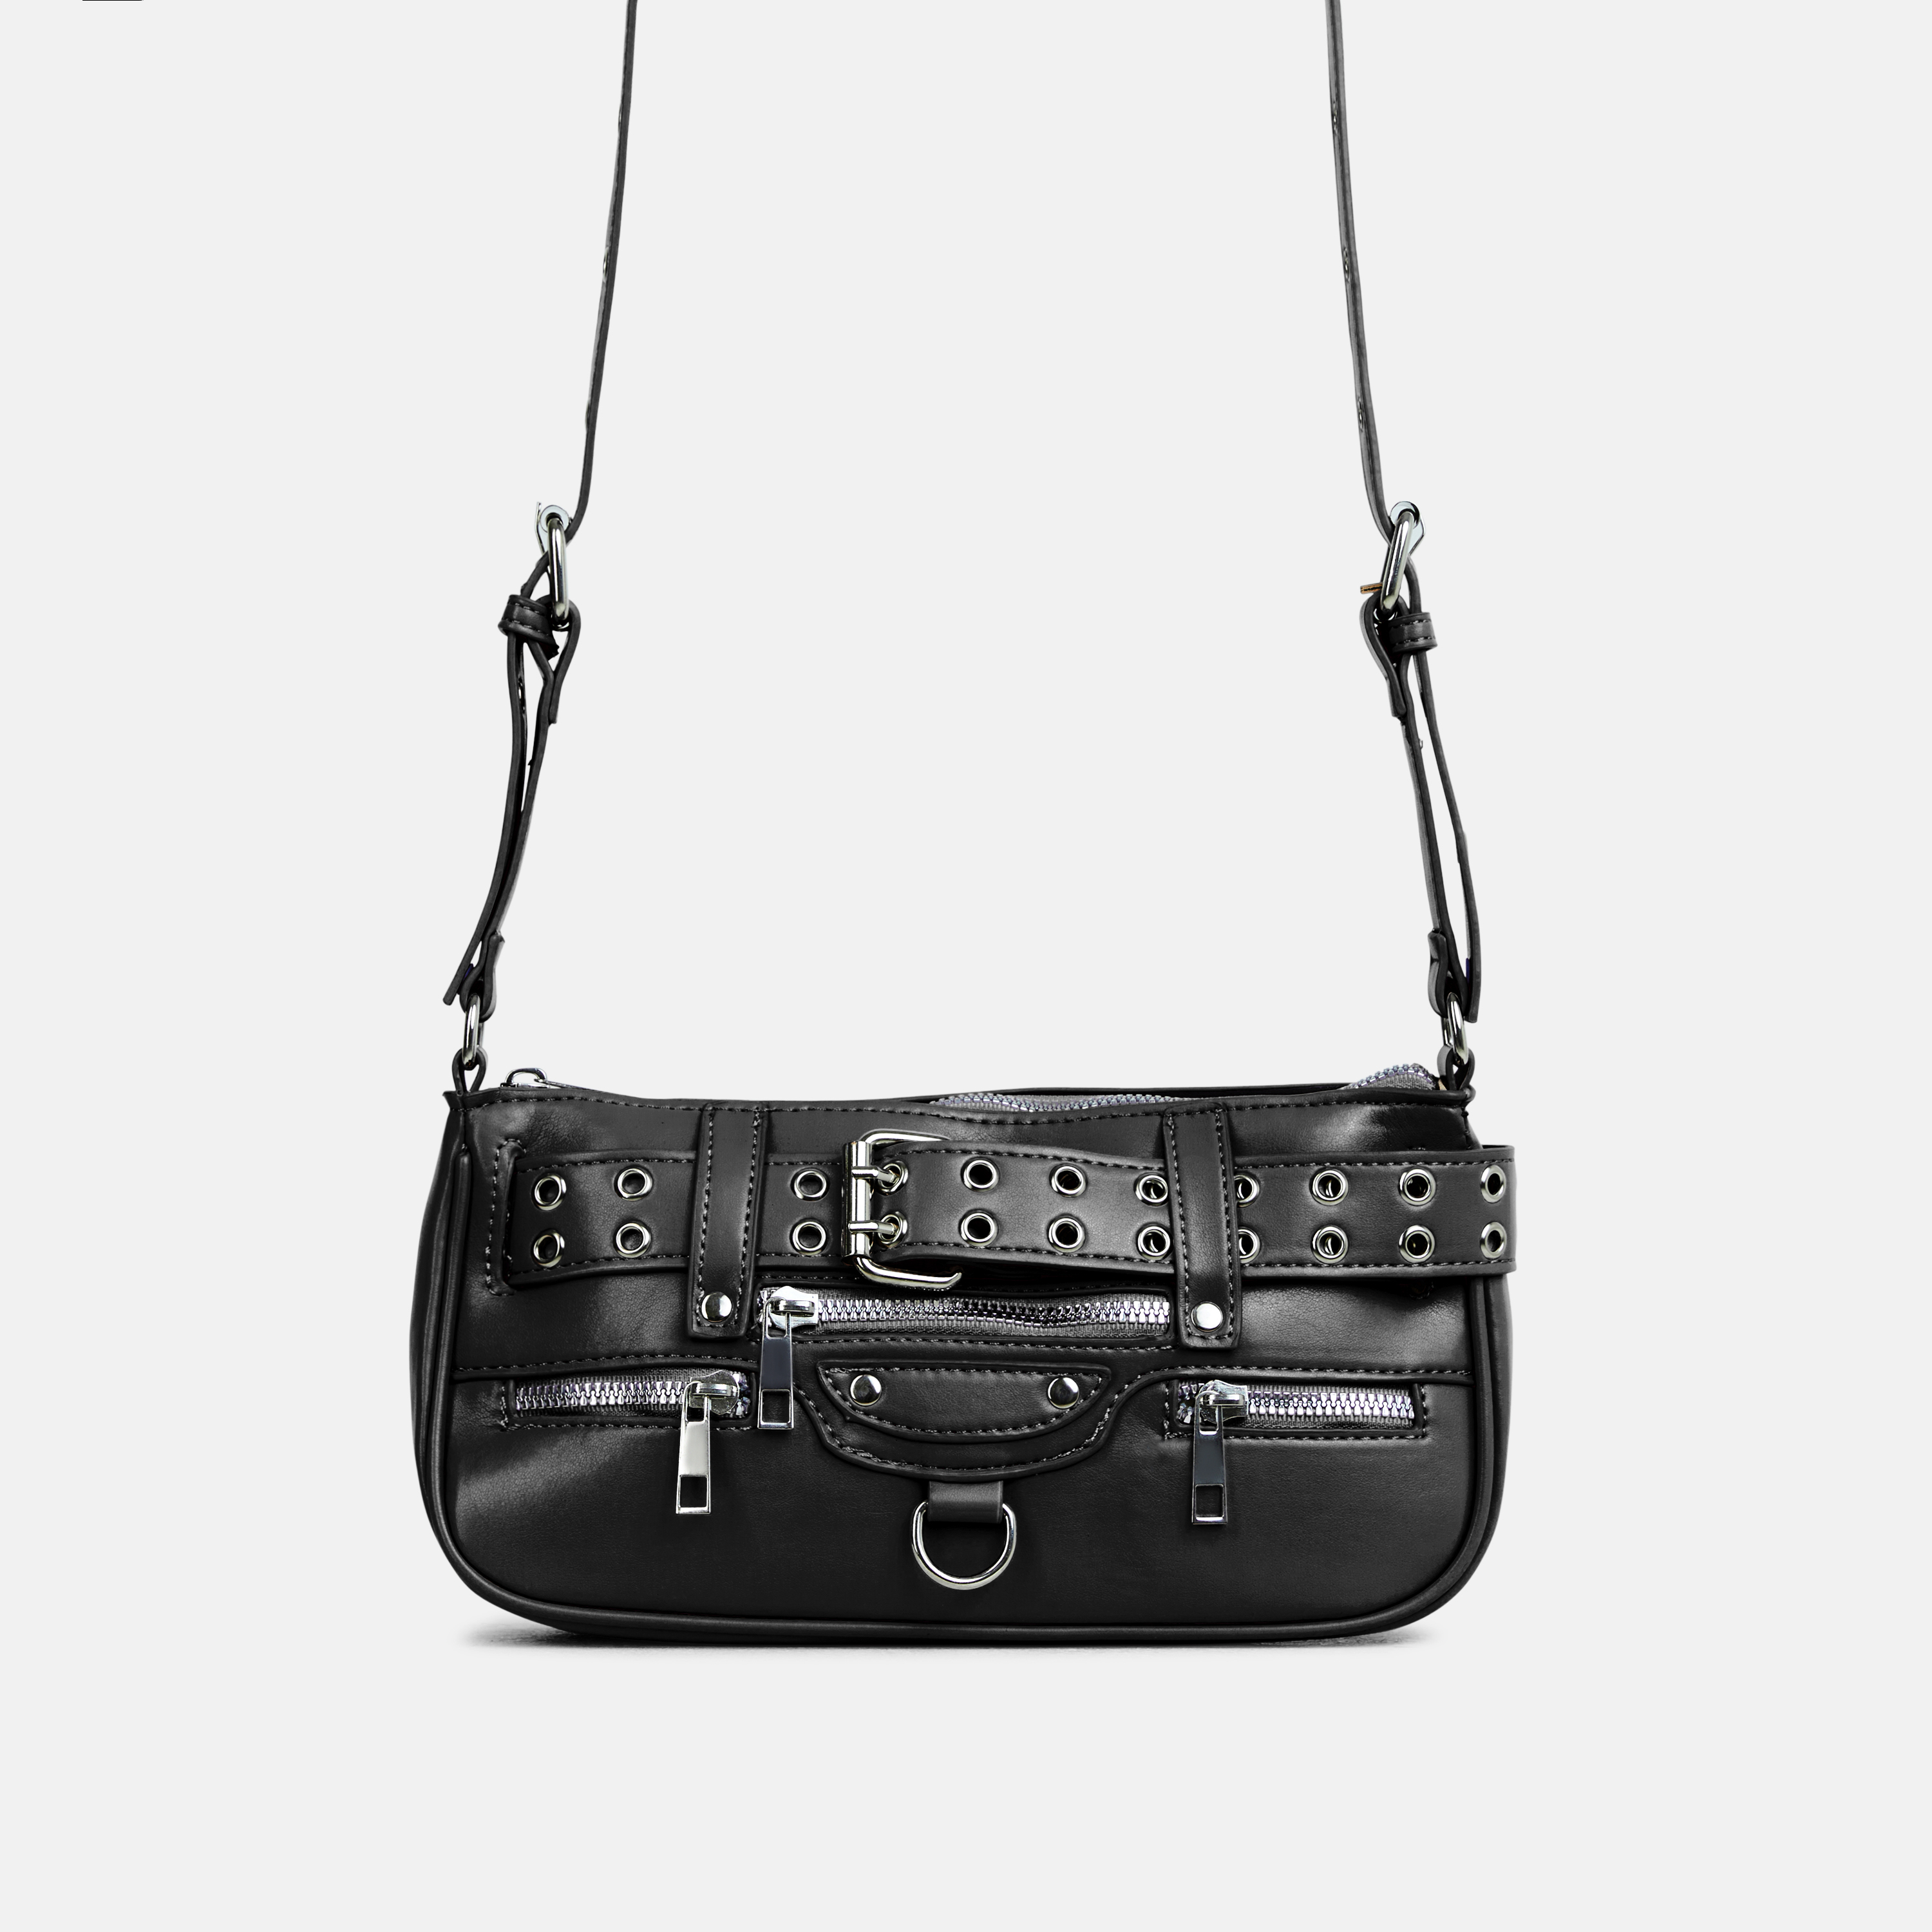 Garla Eyelet Buckle Detail Rectangle Shaped Cross Body Bag in Black Faux Leather, One Size - Ego